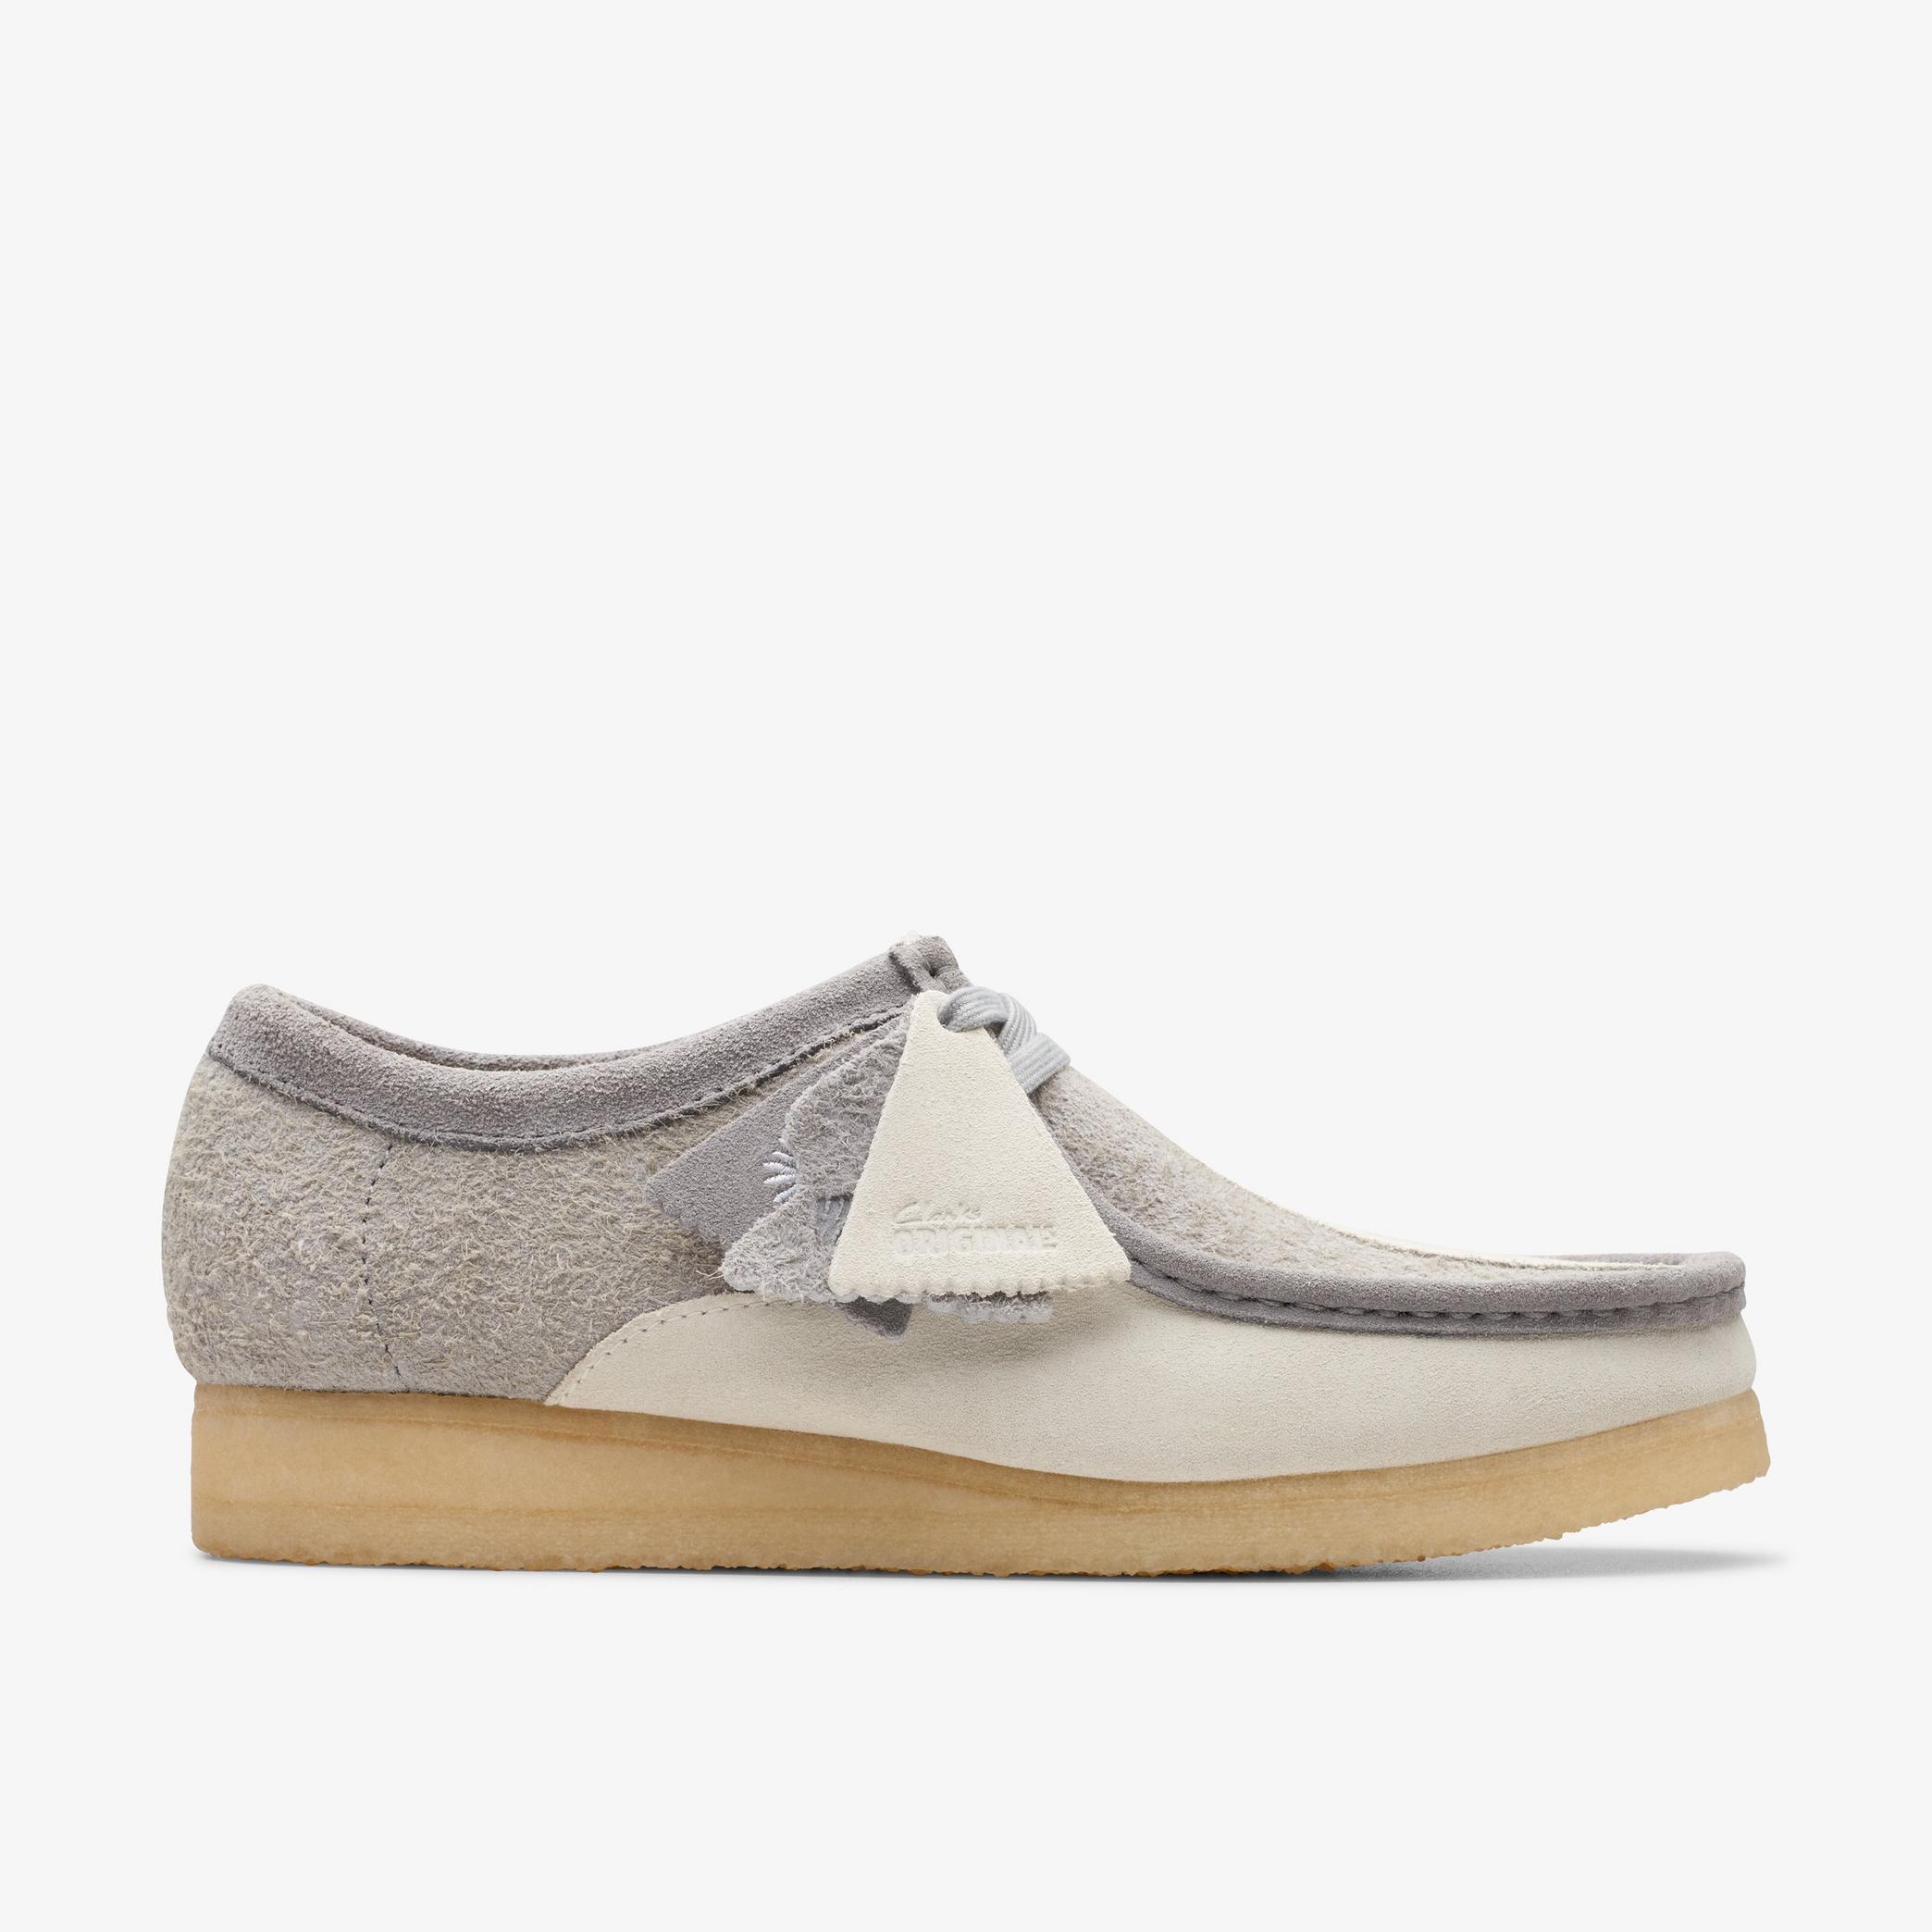 Wallabee Grey/Off White Wallabee, view 1 of 7